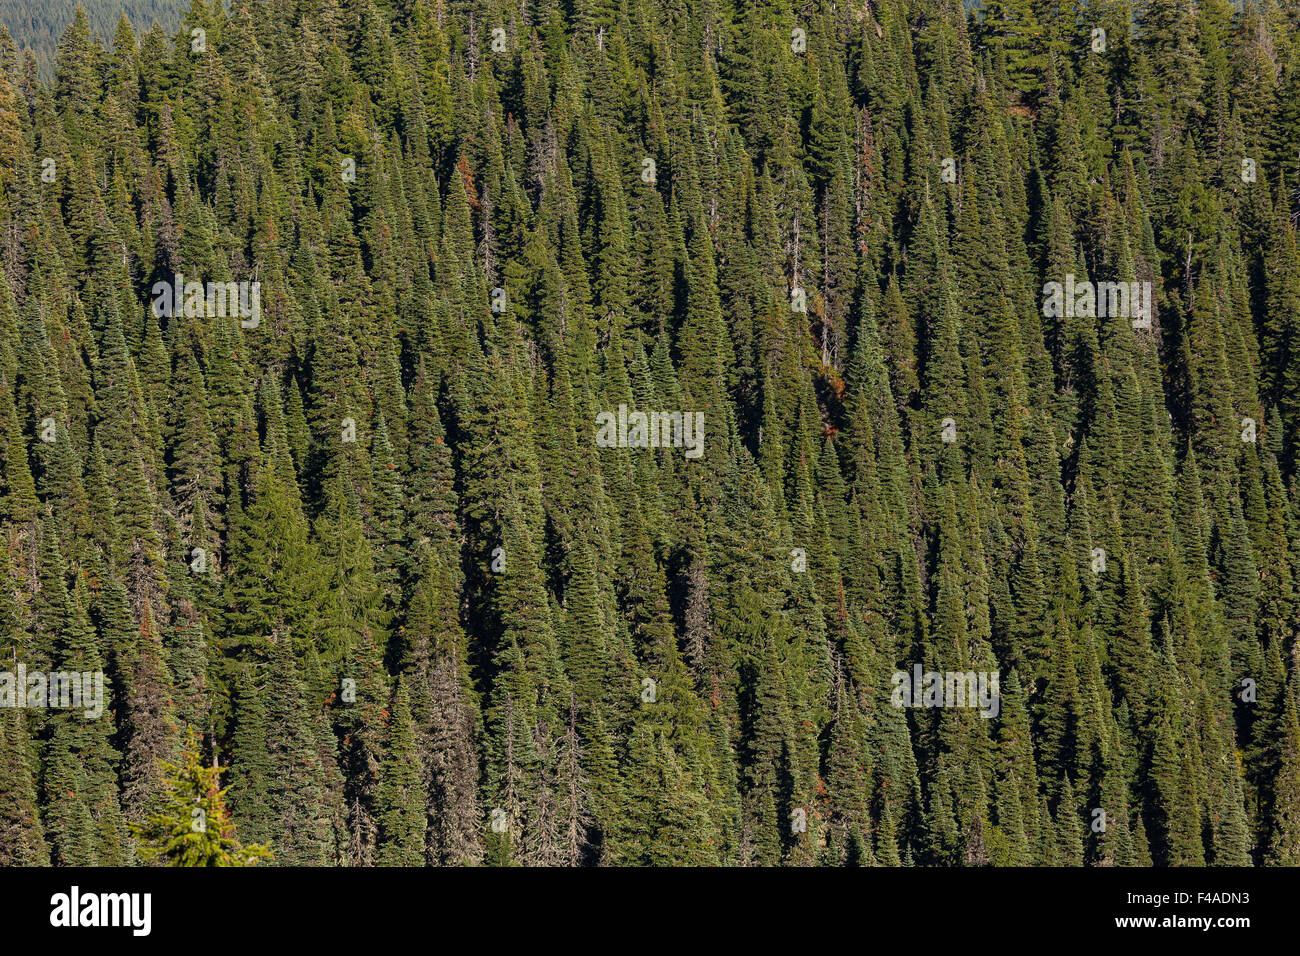 GIFFORD PINCHOT NATIONAL FOREST, WASHINGTON, USA - Aerial view of forest of trees in Indian Heaven wilderness. Stock Photo